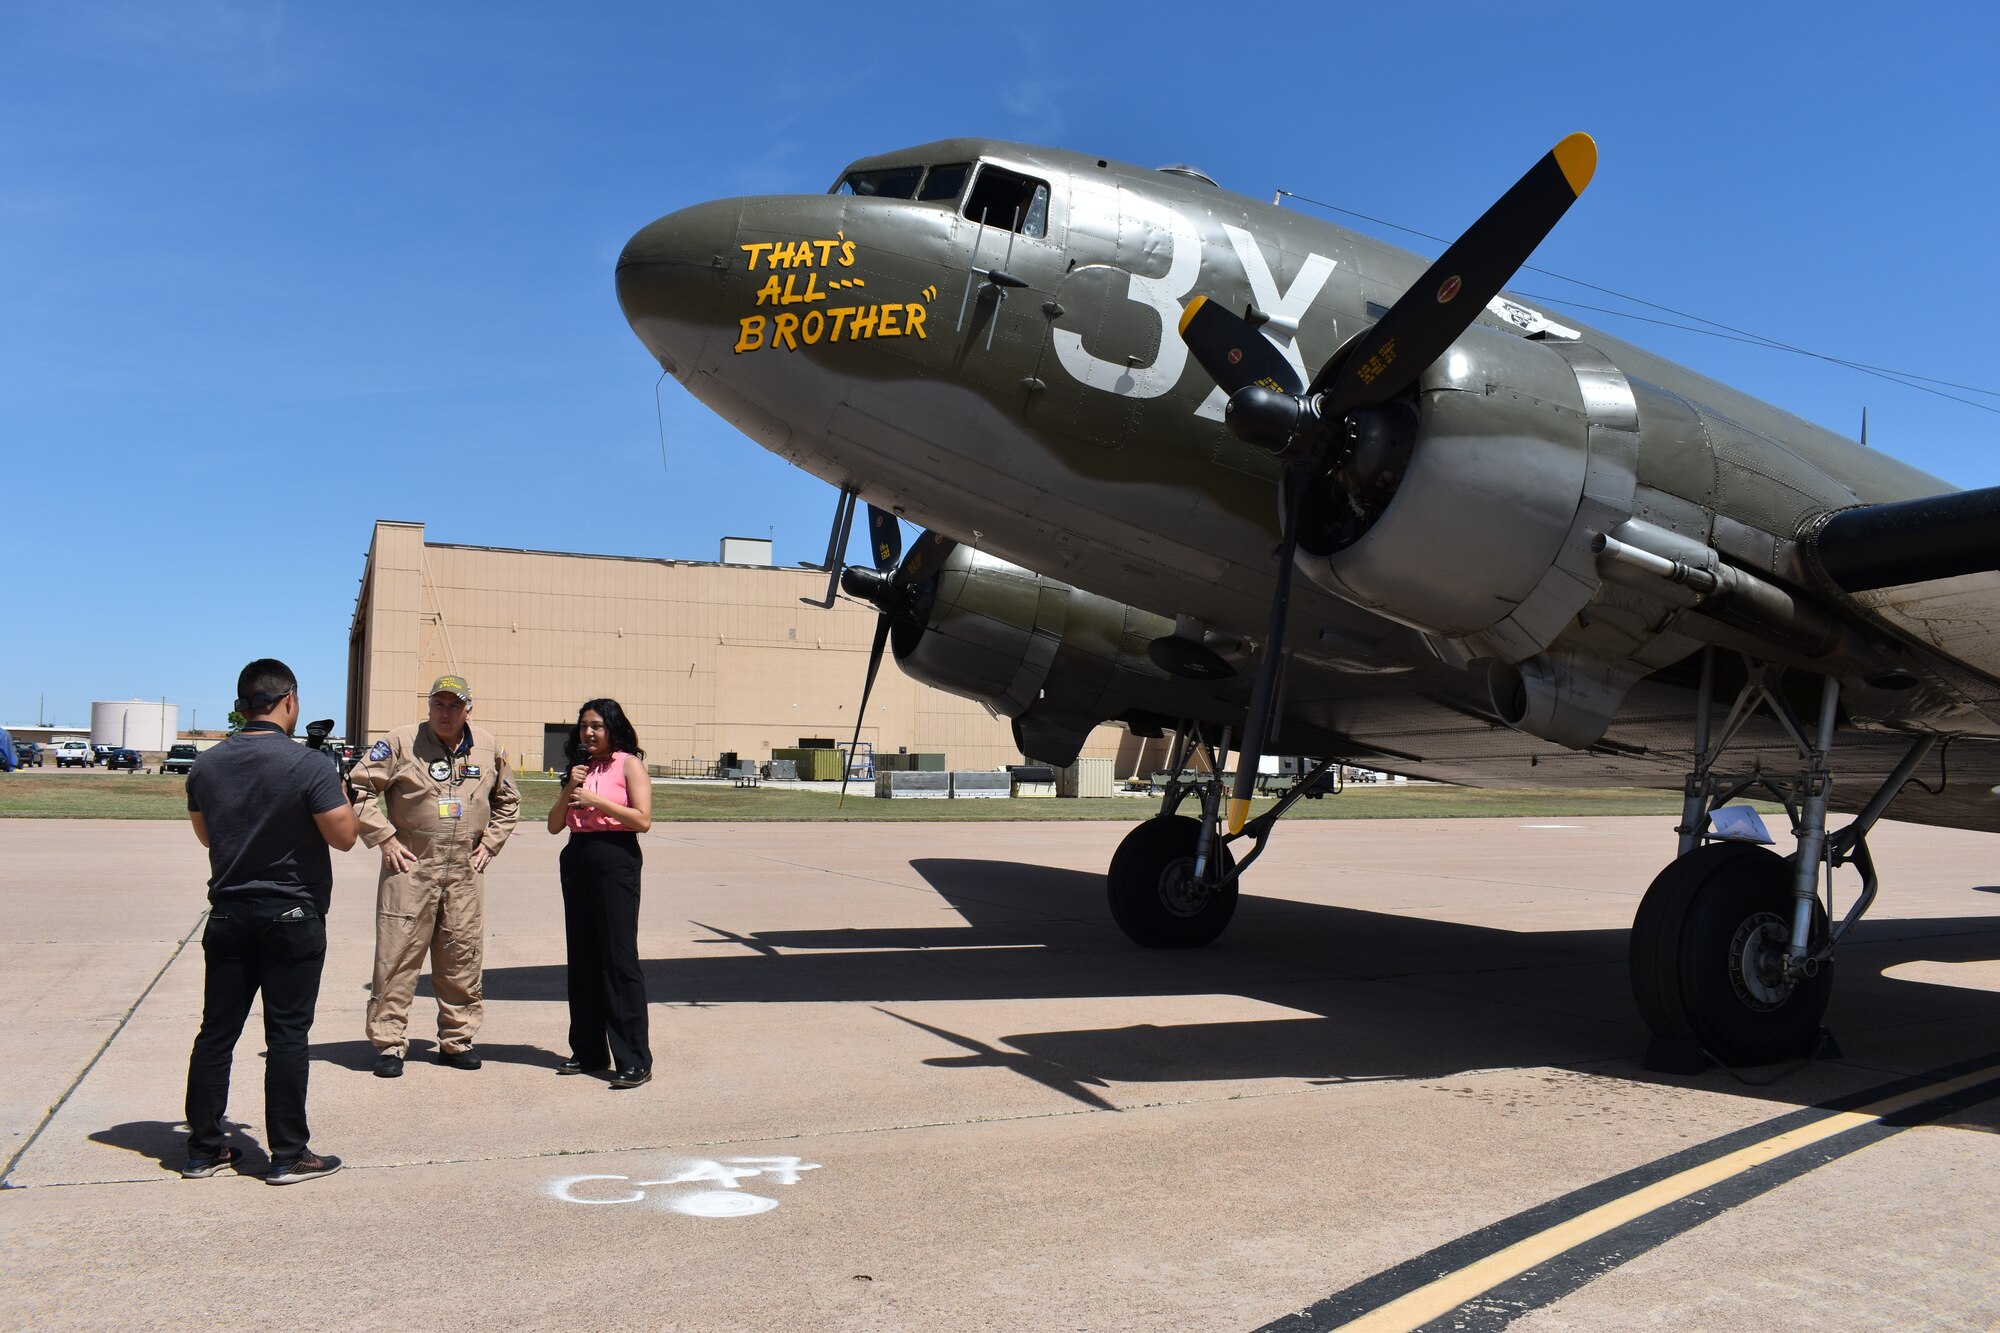 Abilene local media members interview T.J. Cook, Commemorative Air Force Ghost Squadron C-47 pilot, in front of the C-47 That’s All, Brother aircraft during the 2023 Dyess Big Country Air Fest rehearsal day at Dyess Air Force Base, Texas, April 21, 2023. More than 30,000 event goers attended the one-day event highlighting the best of America’s only Lift and Strike base, Air Force heritage and Dyess community partners. The air show featured the F-22 Raptor demo team, U.S. Air Force Academy Wings of Blue, U.S. Army Golden Knights, WWII heritage flight and B-1B Lancer and C-130J Super Hercules fly overs. (U.S. Air Force photo by Staff Sgt. Matthew Angulo)